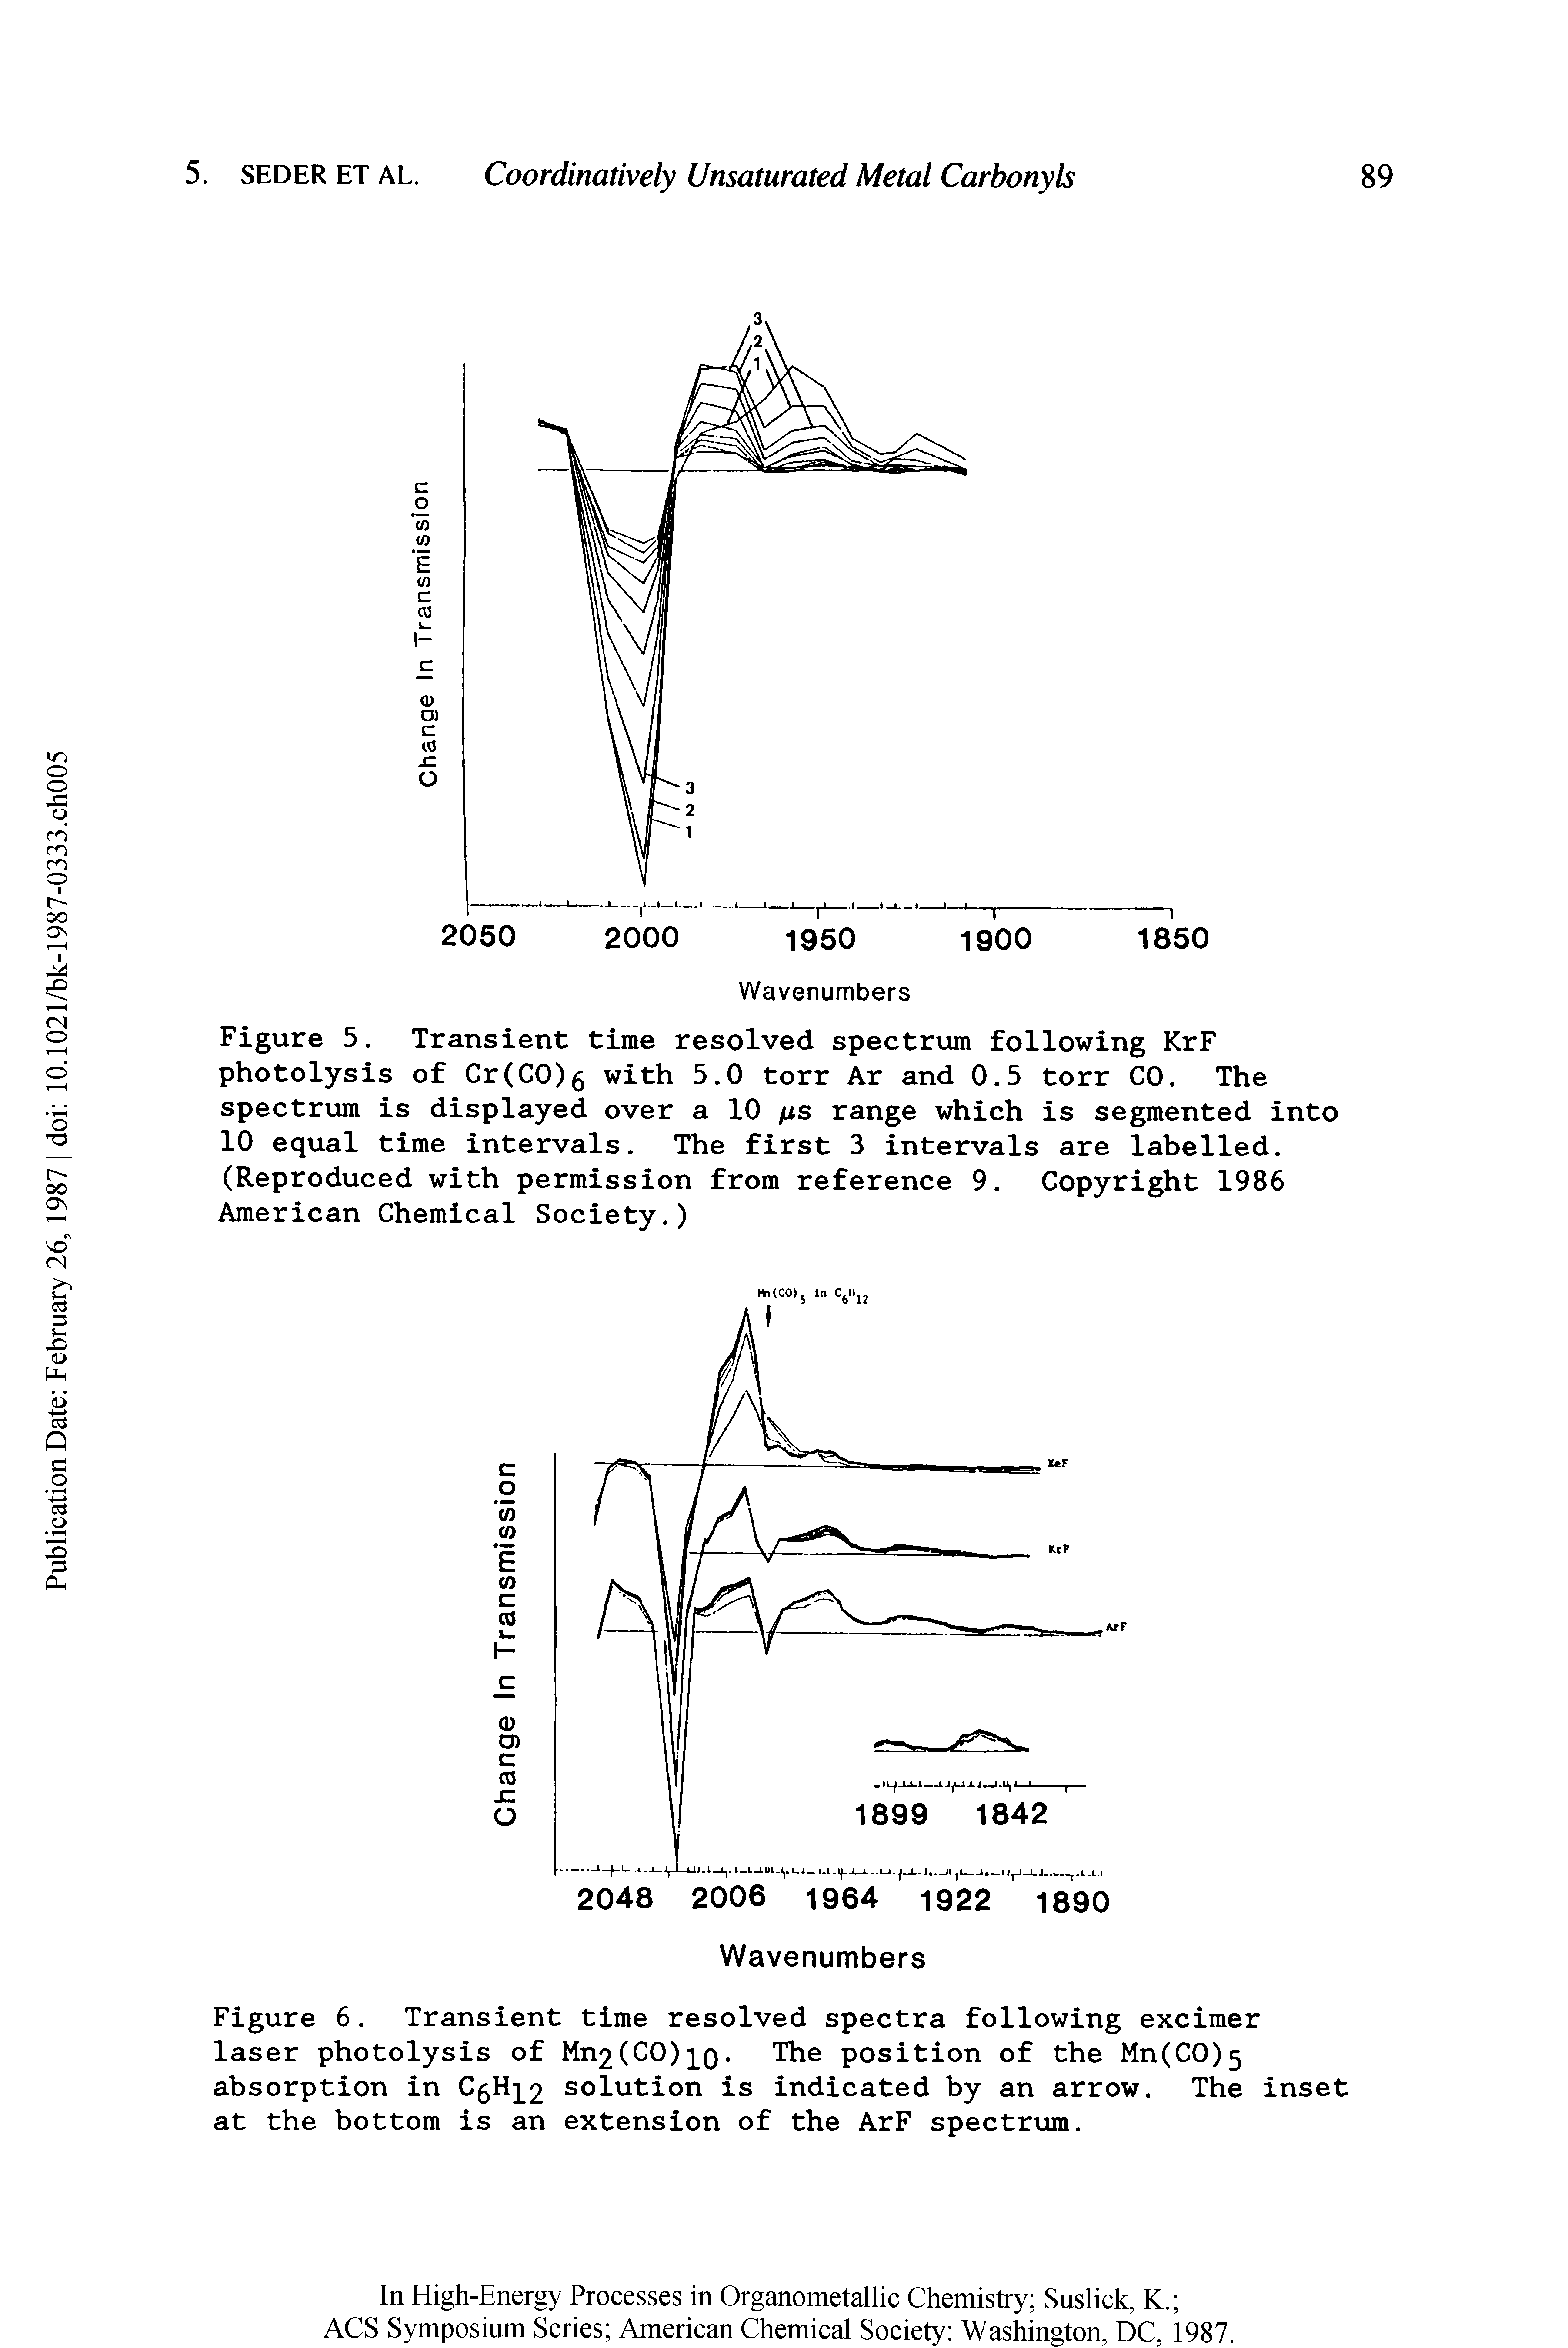 Figure 6. Transient time resolved spectra following excimer laser photolysis of Mn2(CO)io The position of the Mn(C0)5 absorption in CfcH] solution is indicated by an arrow. The inset at the bottom is an extension of the ArF spectrum.